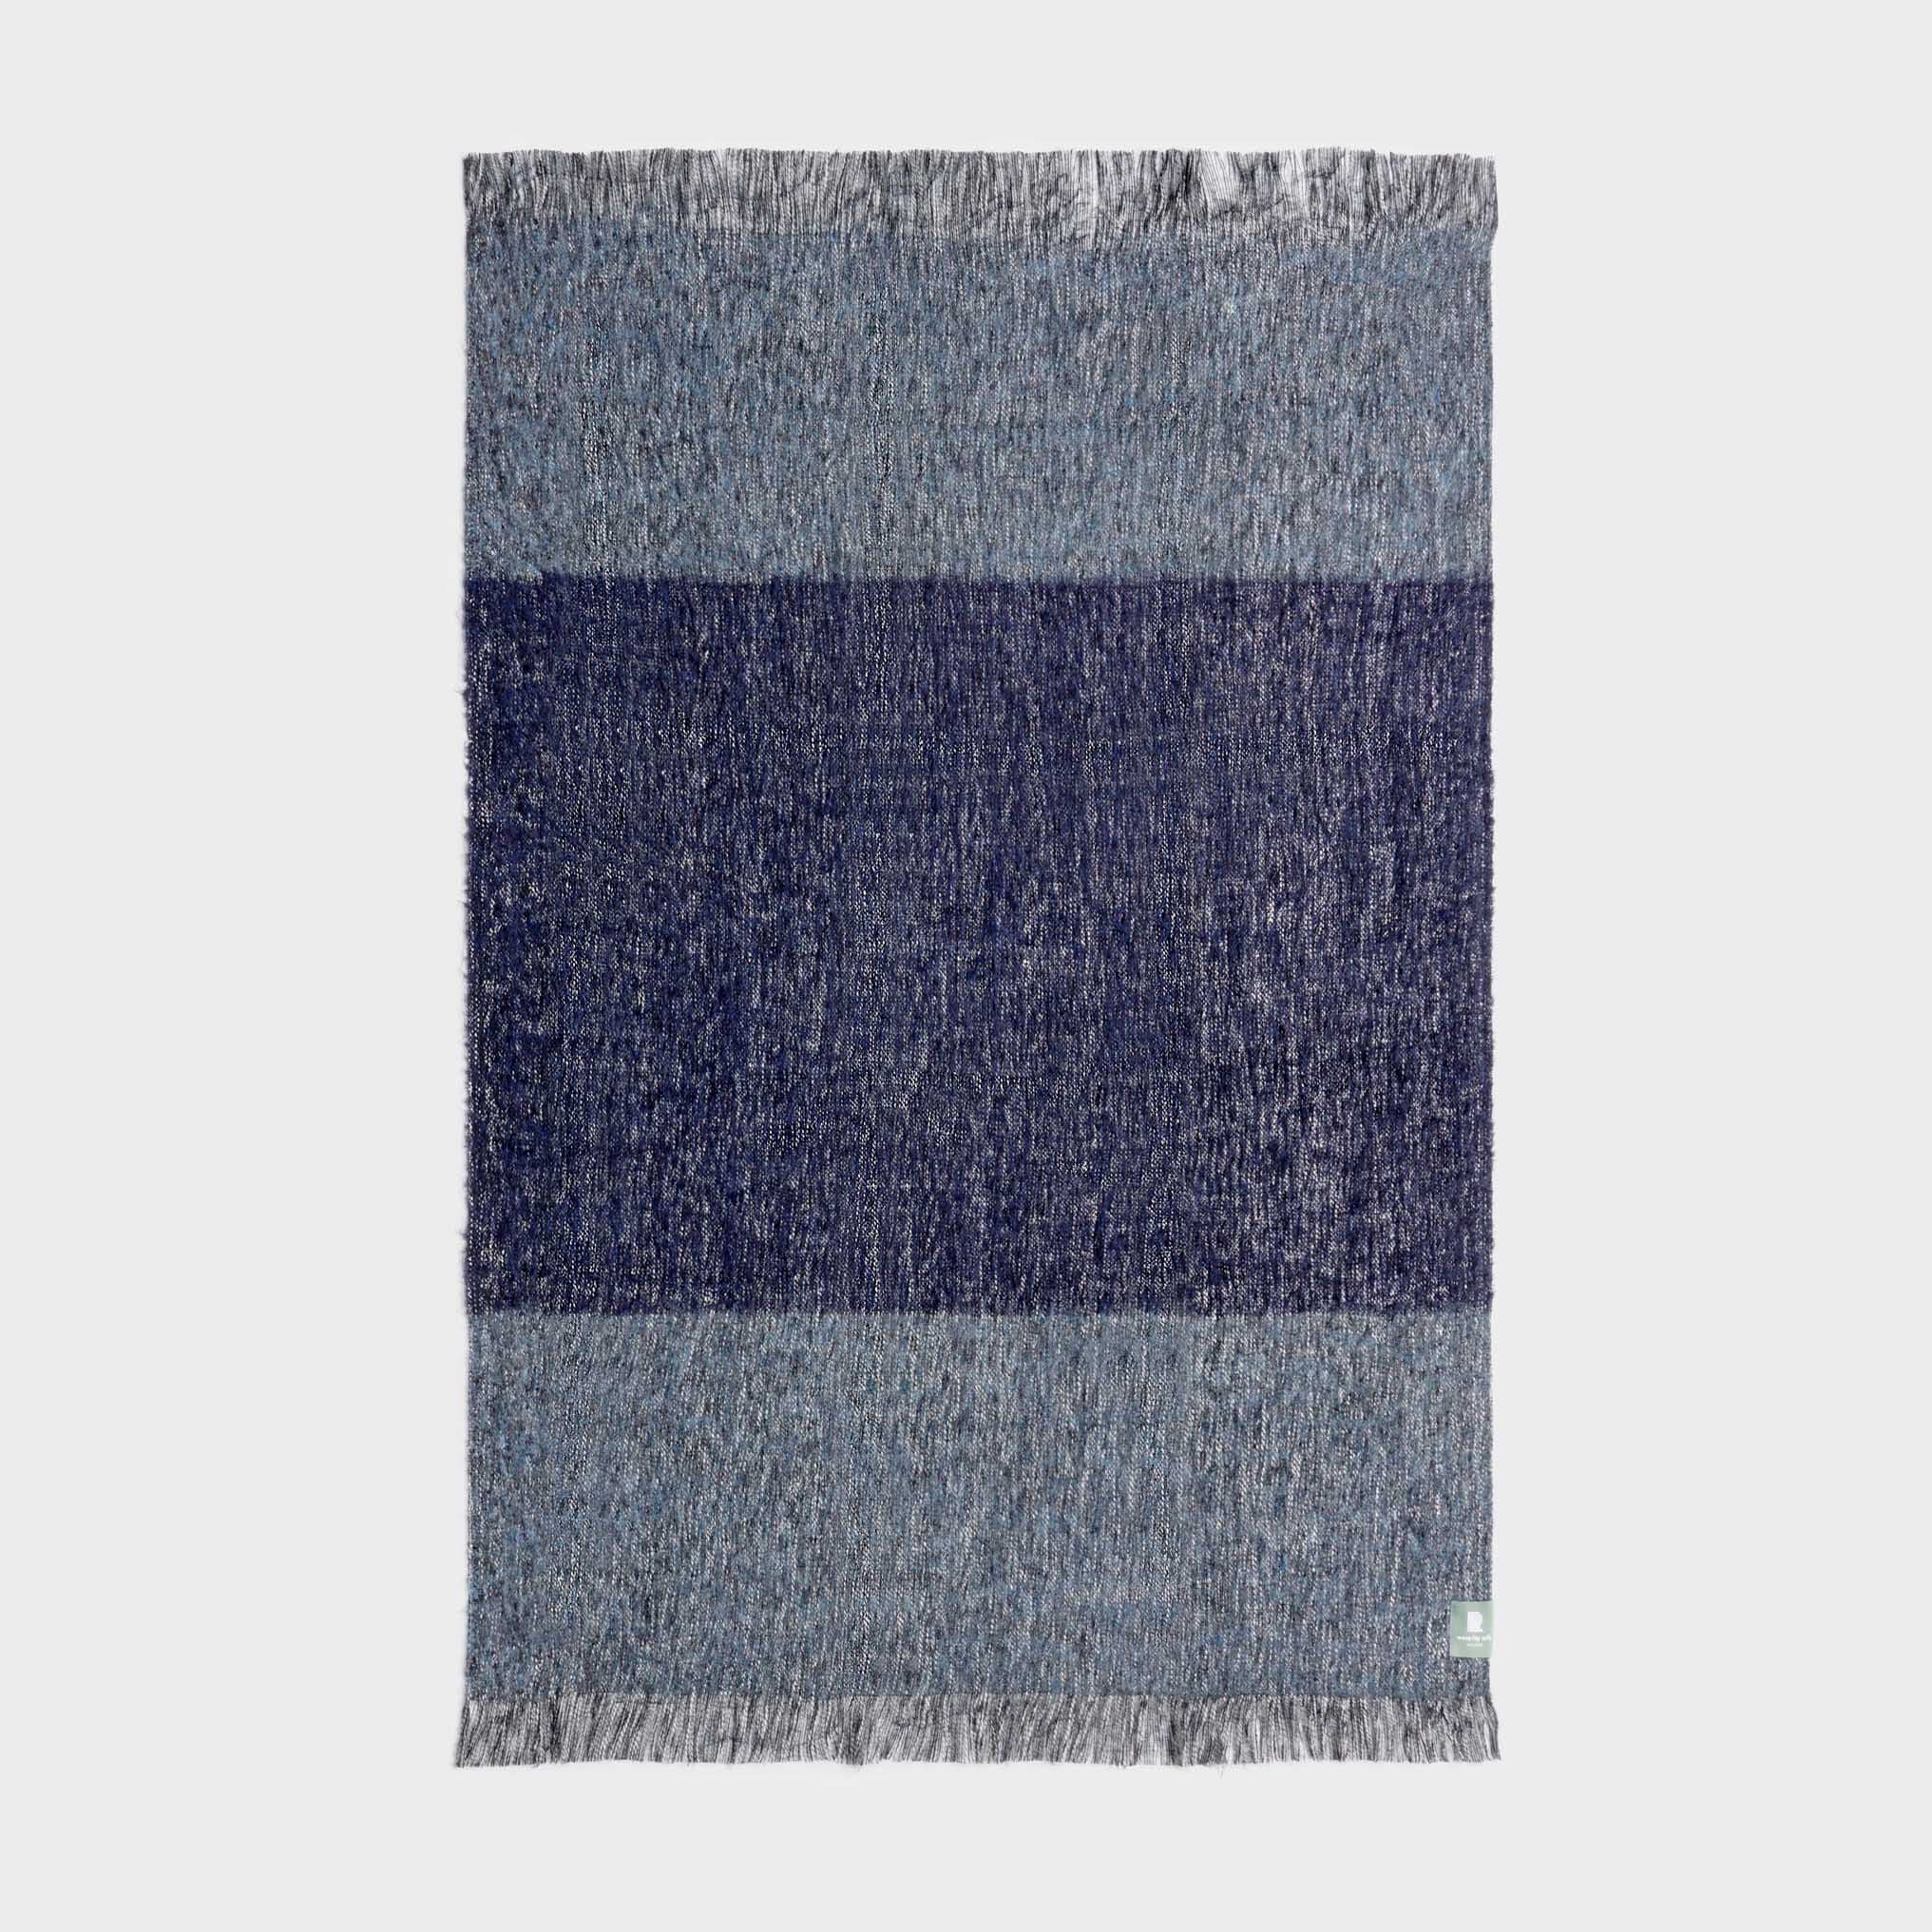 Full view of midnight blue fringe throw showing bold stripe pattern.